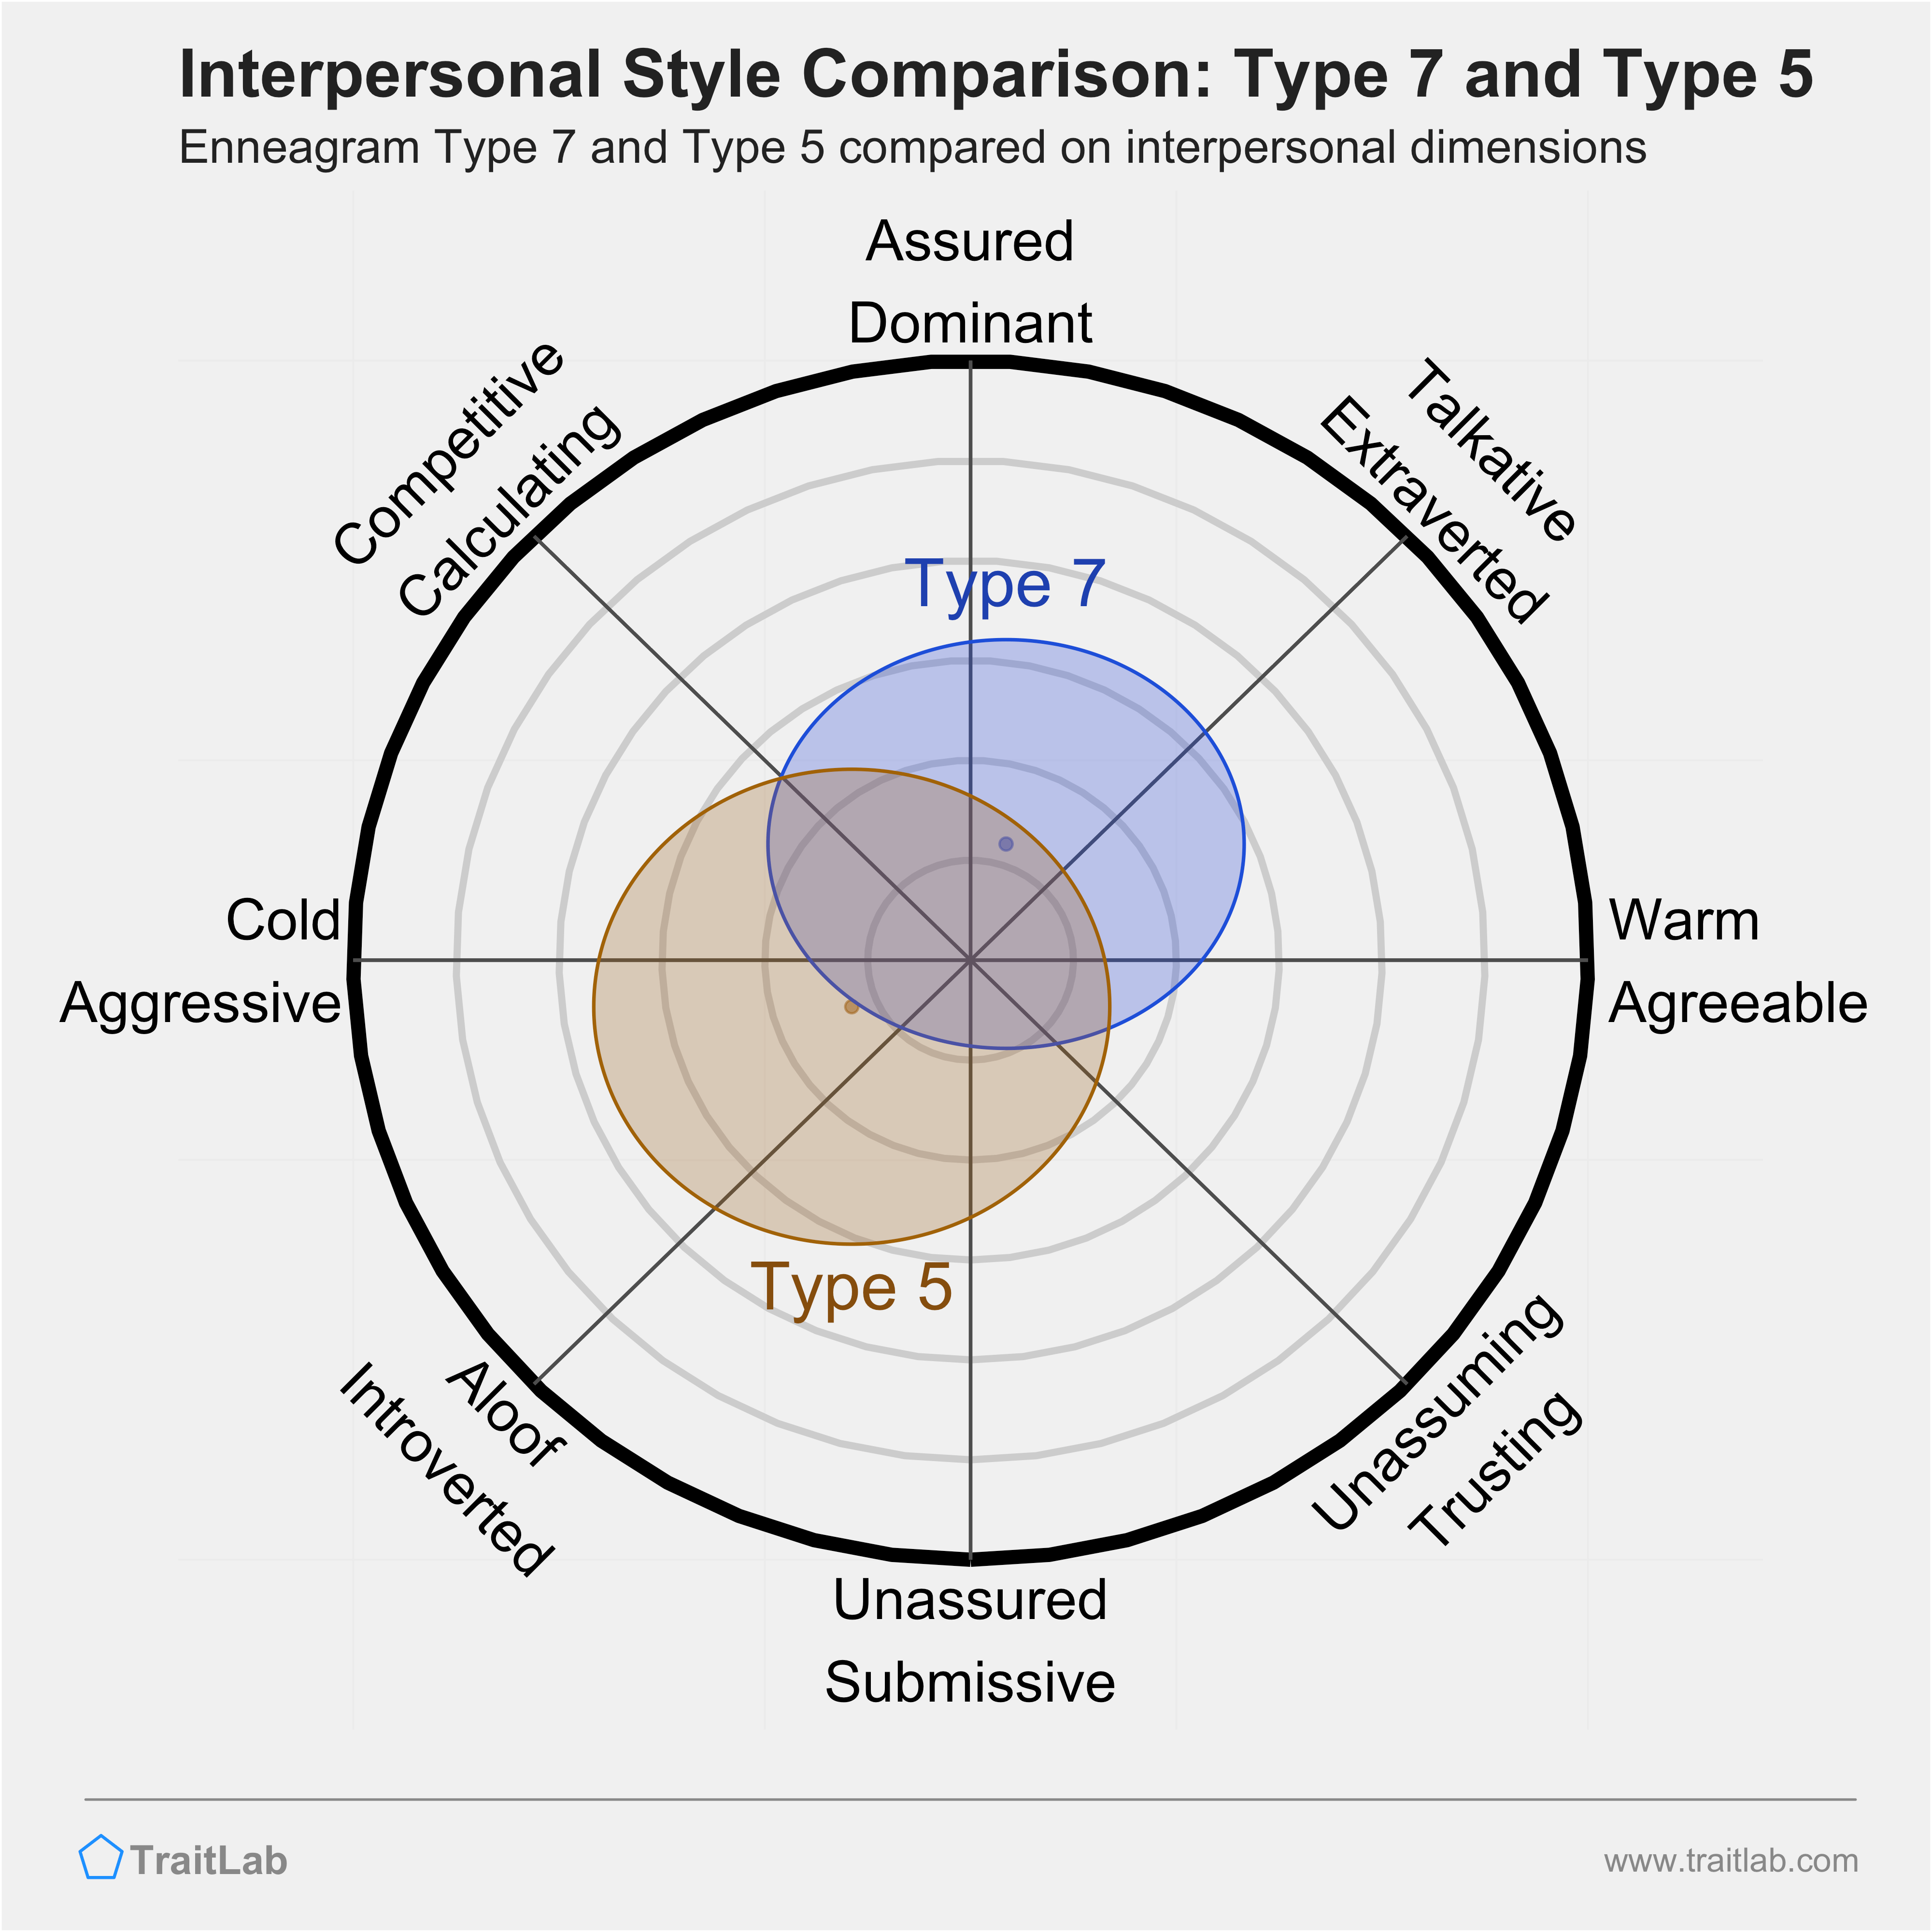 Enneagram Type 7 and Type 5 comparison across interpersonal dimensions